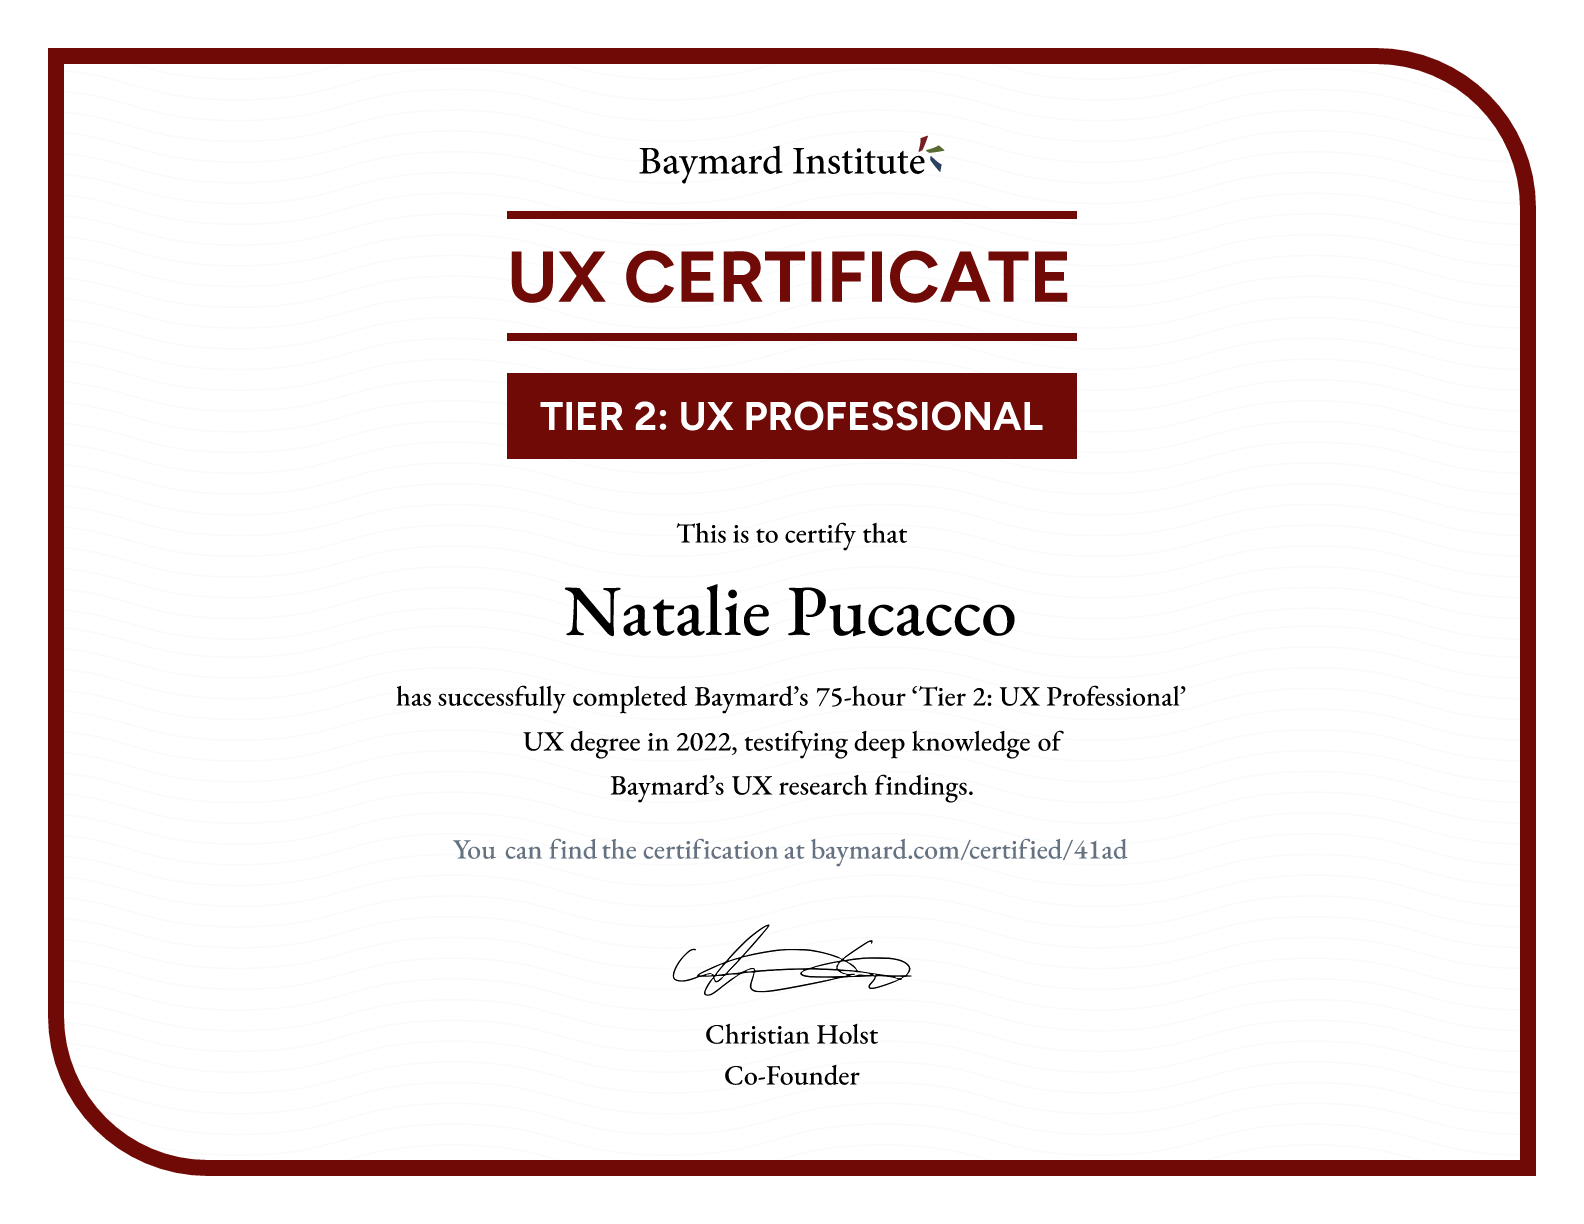 Natalie Pucacco’s certificate